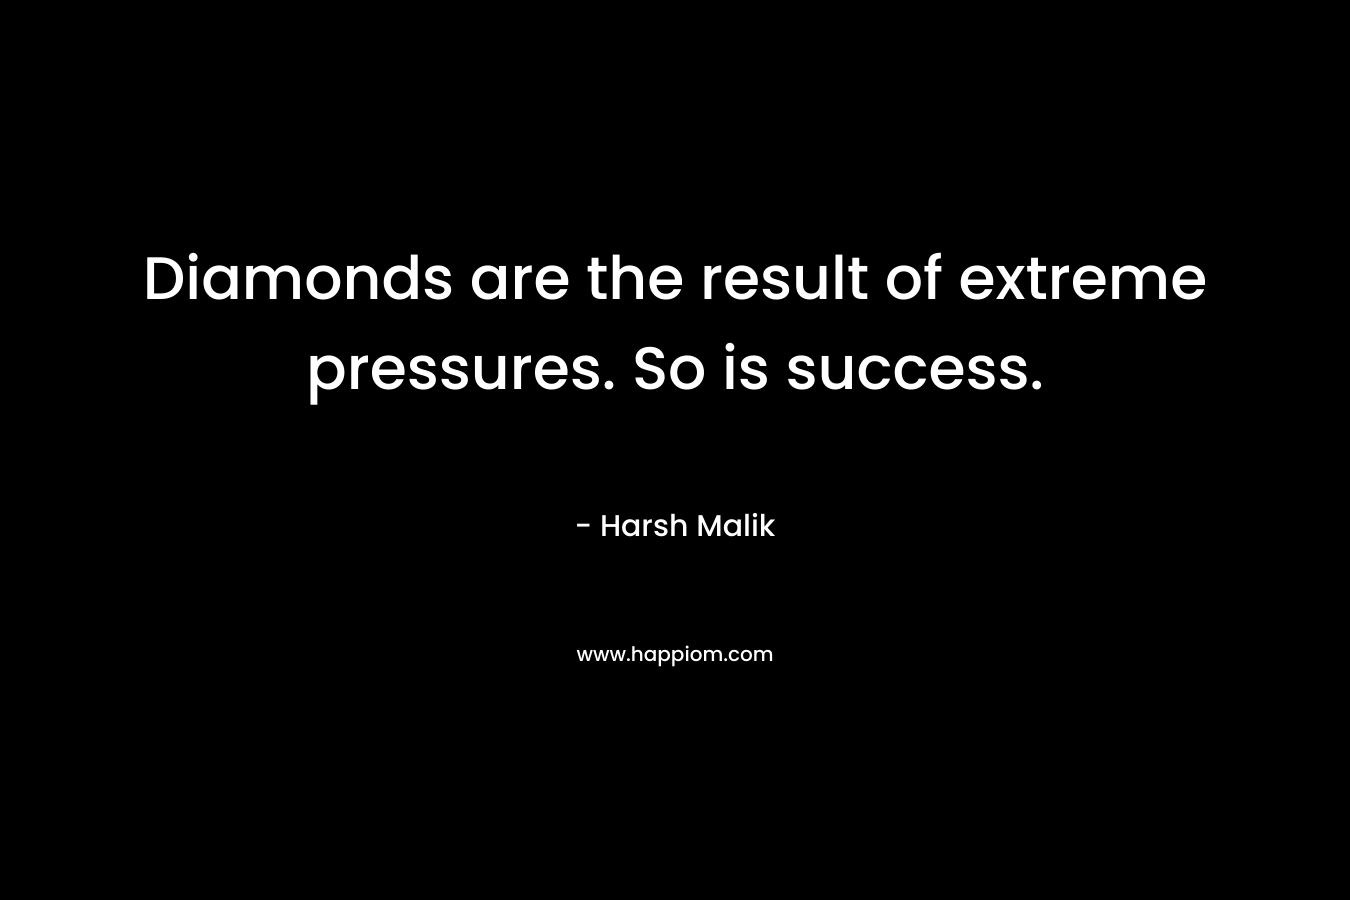 Diamonds are the result of extreme pressures. So is success.